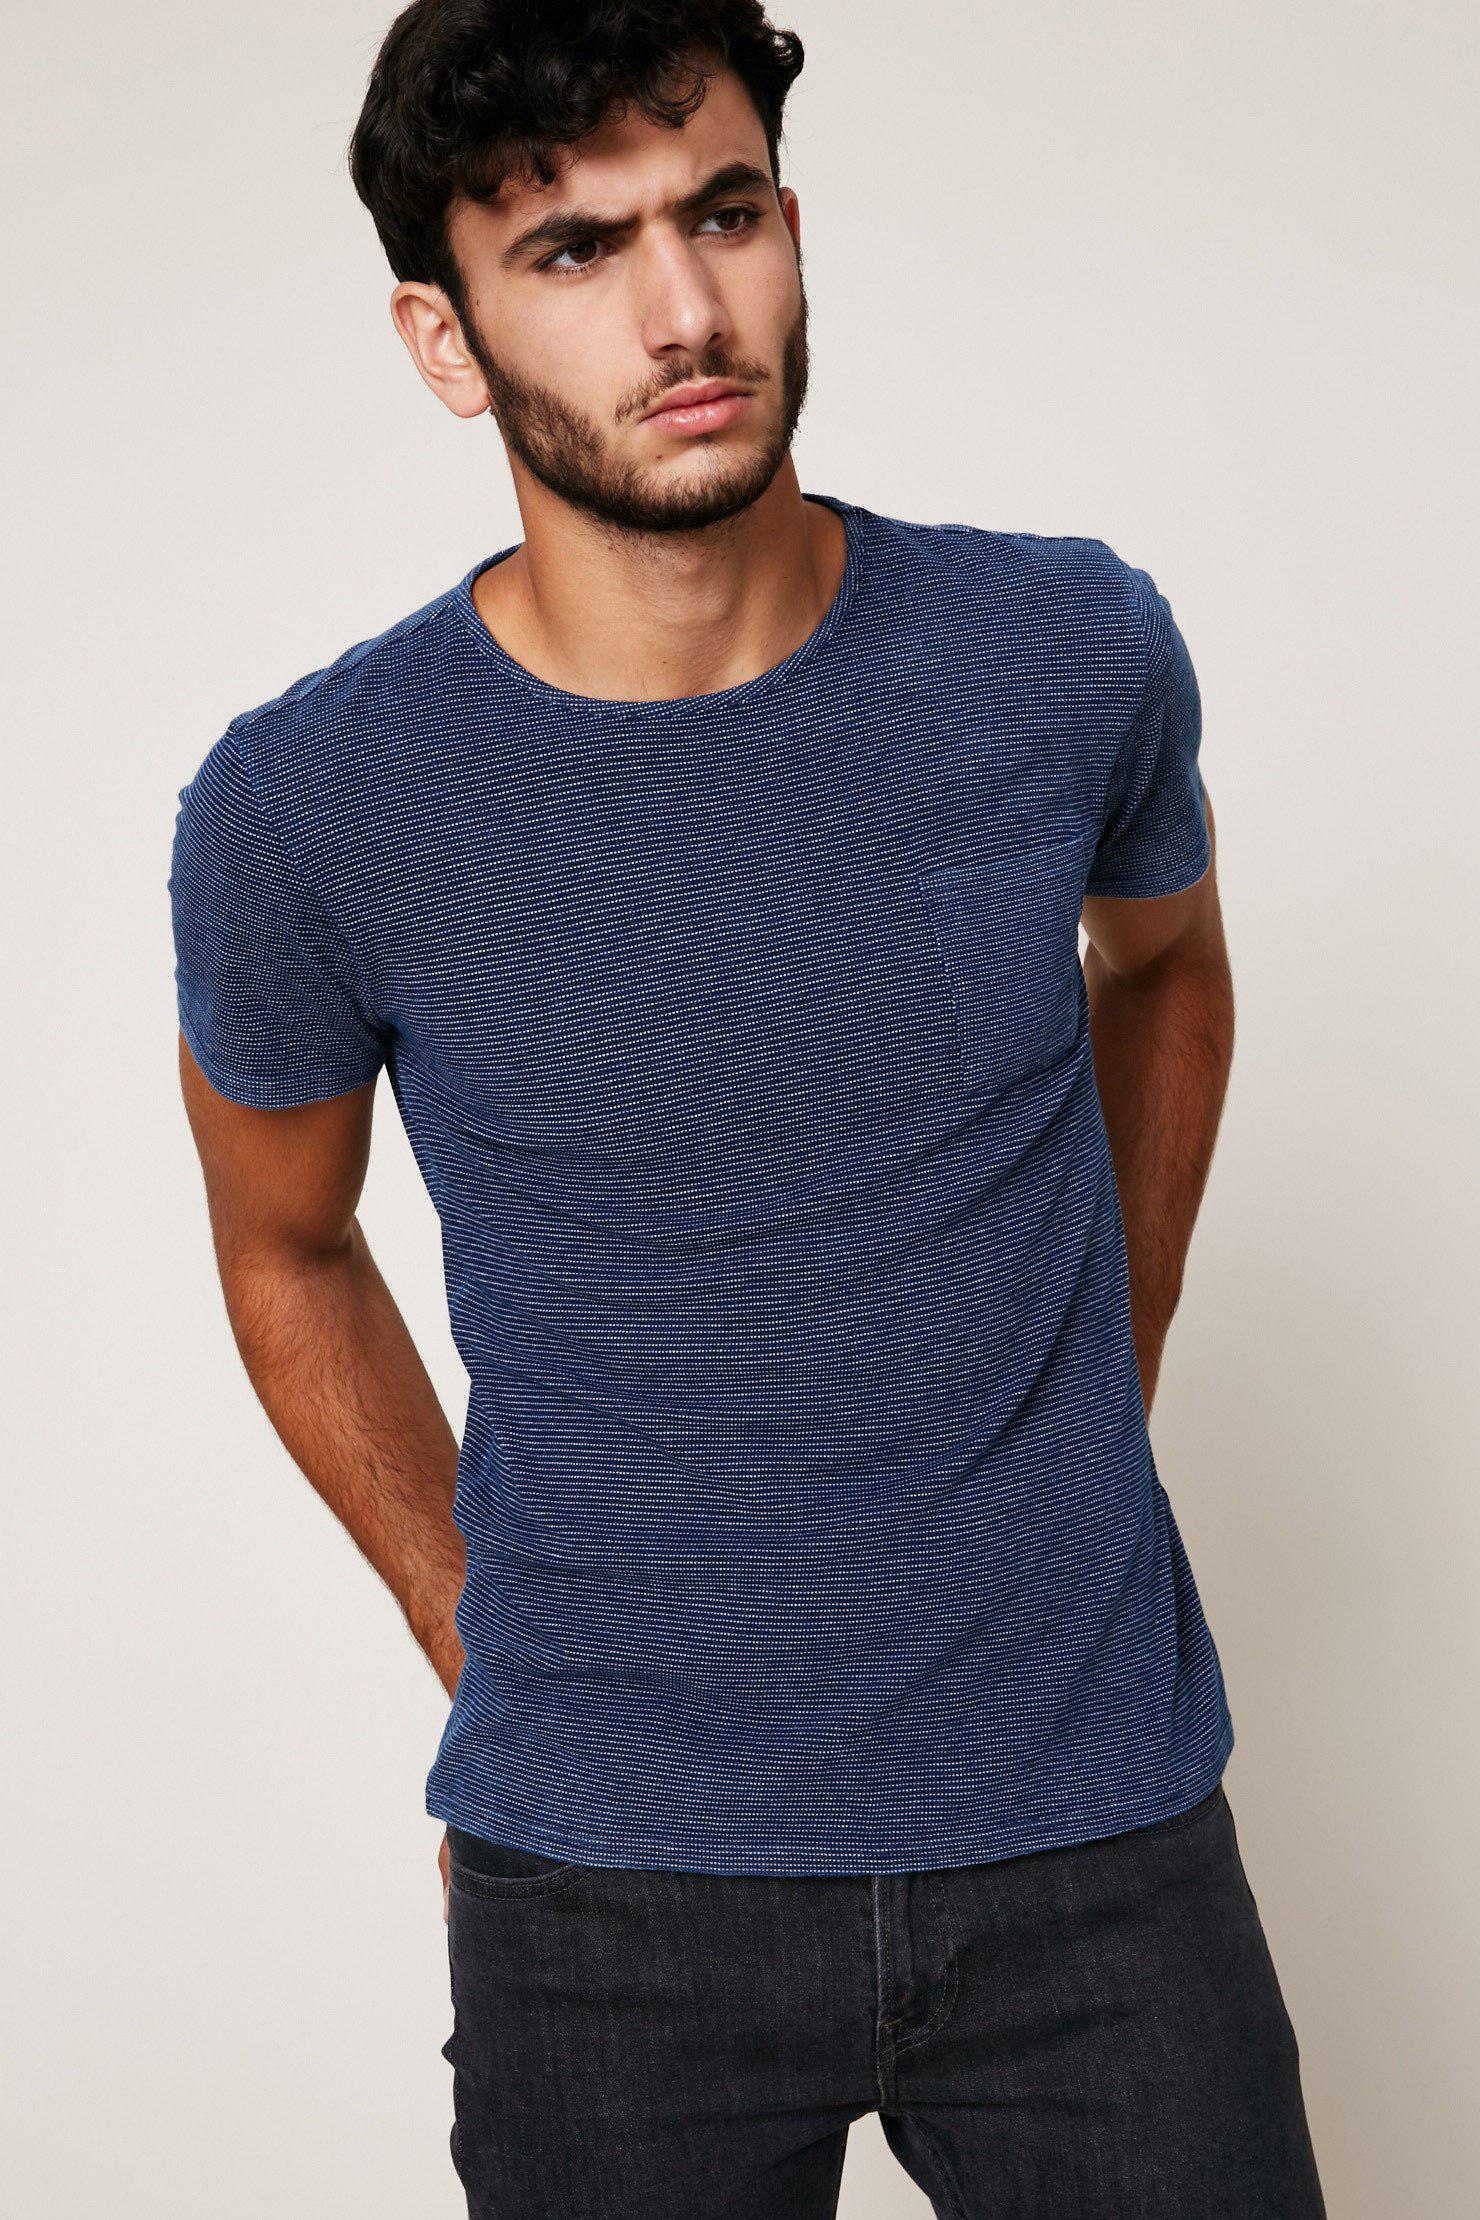 Lyst - Knowledge Cotton Apparel T-shirt in Blue for Men